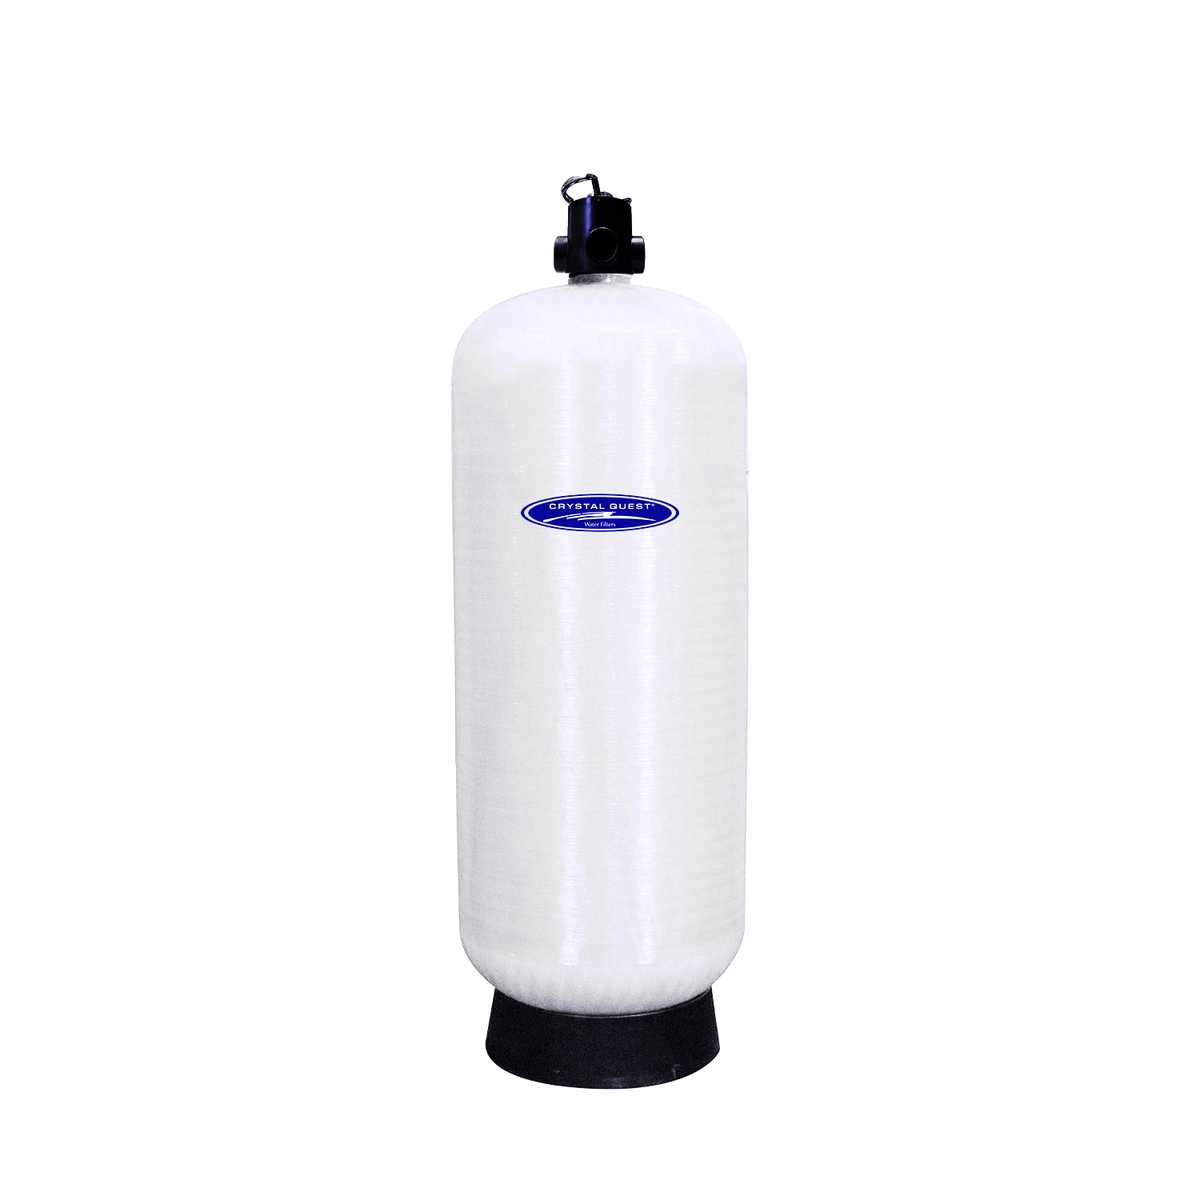 75 GPM / Aluminum Oxide / Manual (Downflow w/ Backwash) Fluoride Removal Water Filtration System - Commercial - Crystal Quest